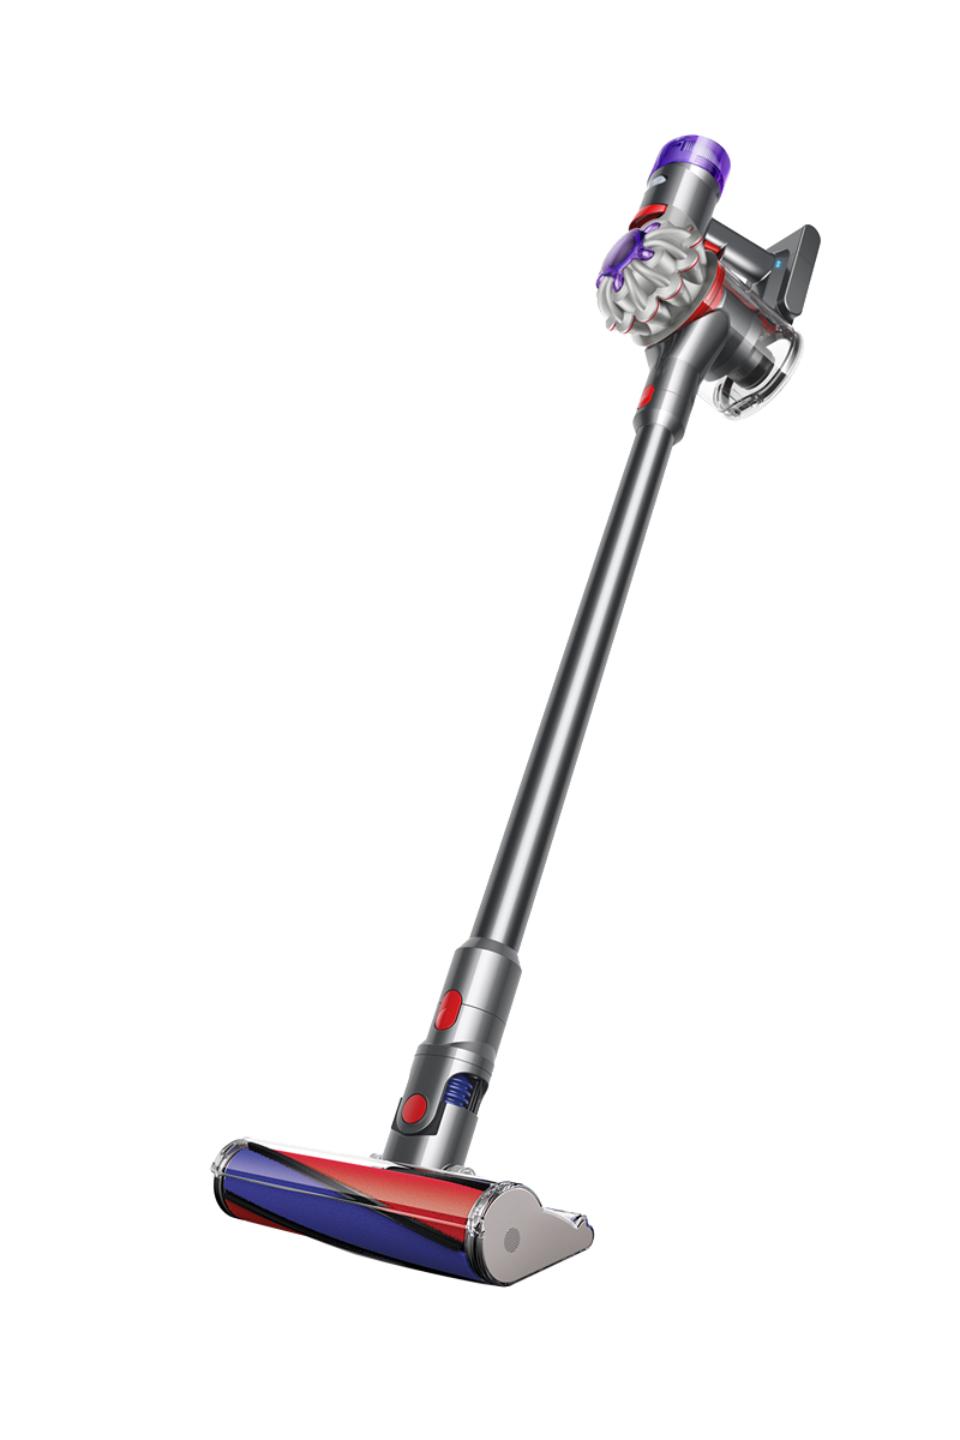 Dyson V8 Absolute Cordless Stick Vacuum + Free Toolkit ($75 value)